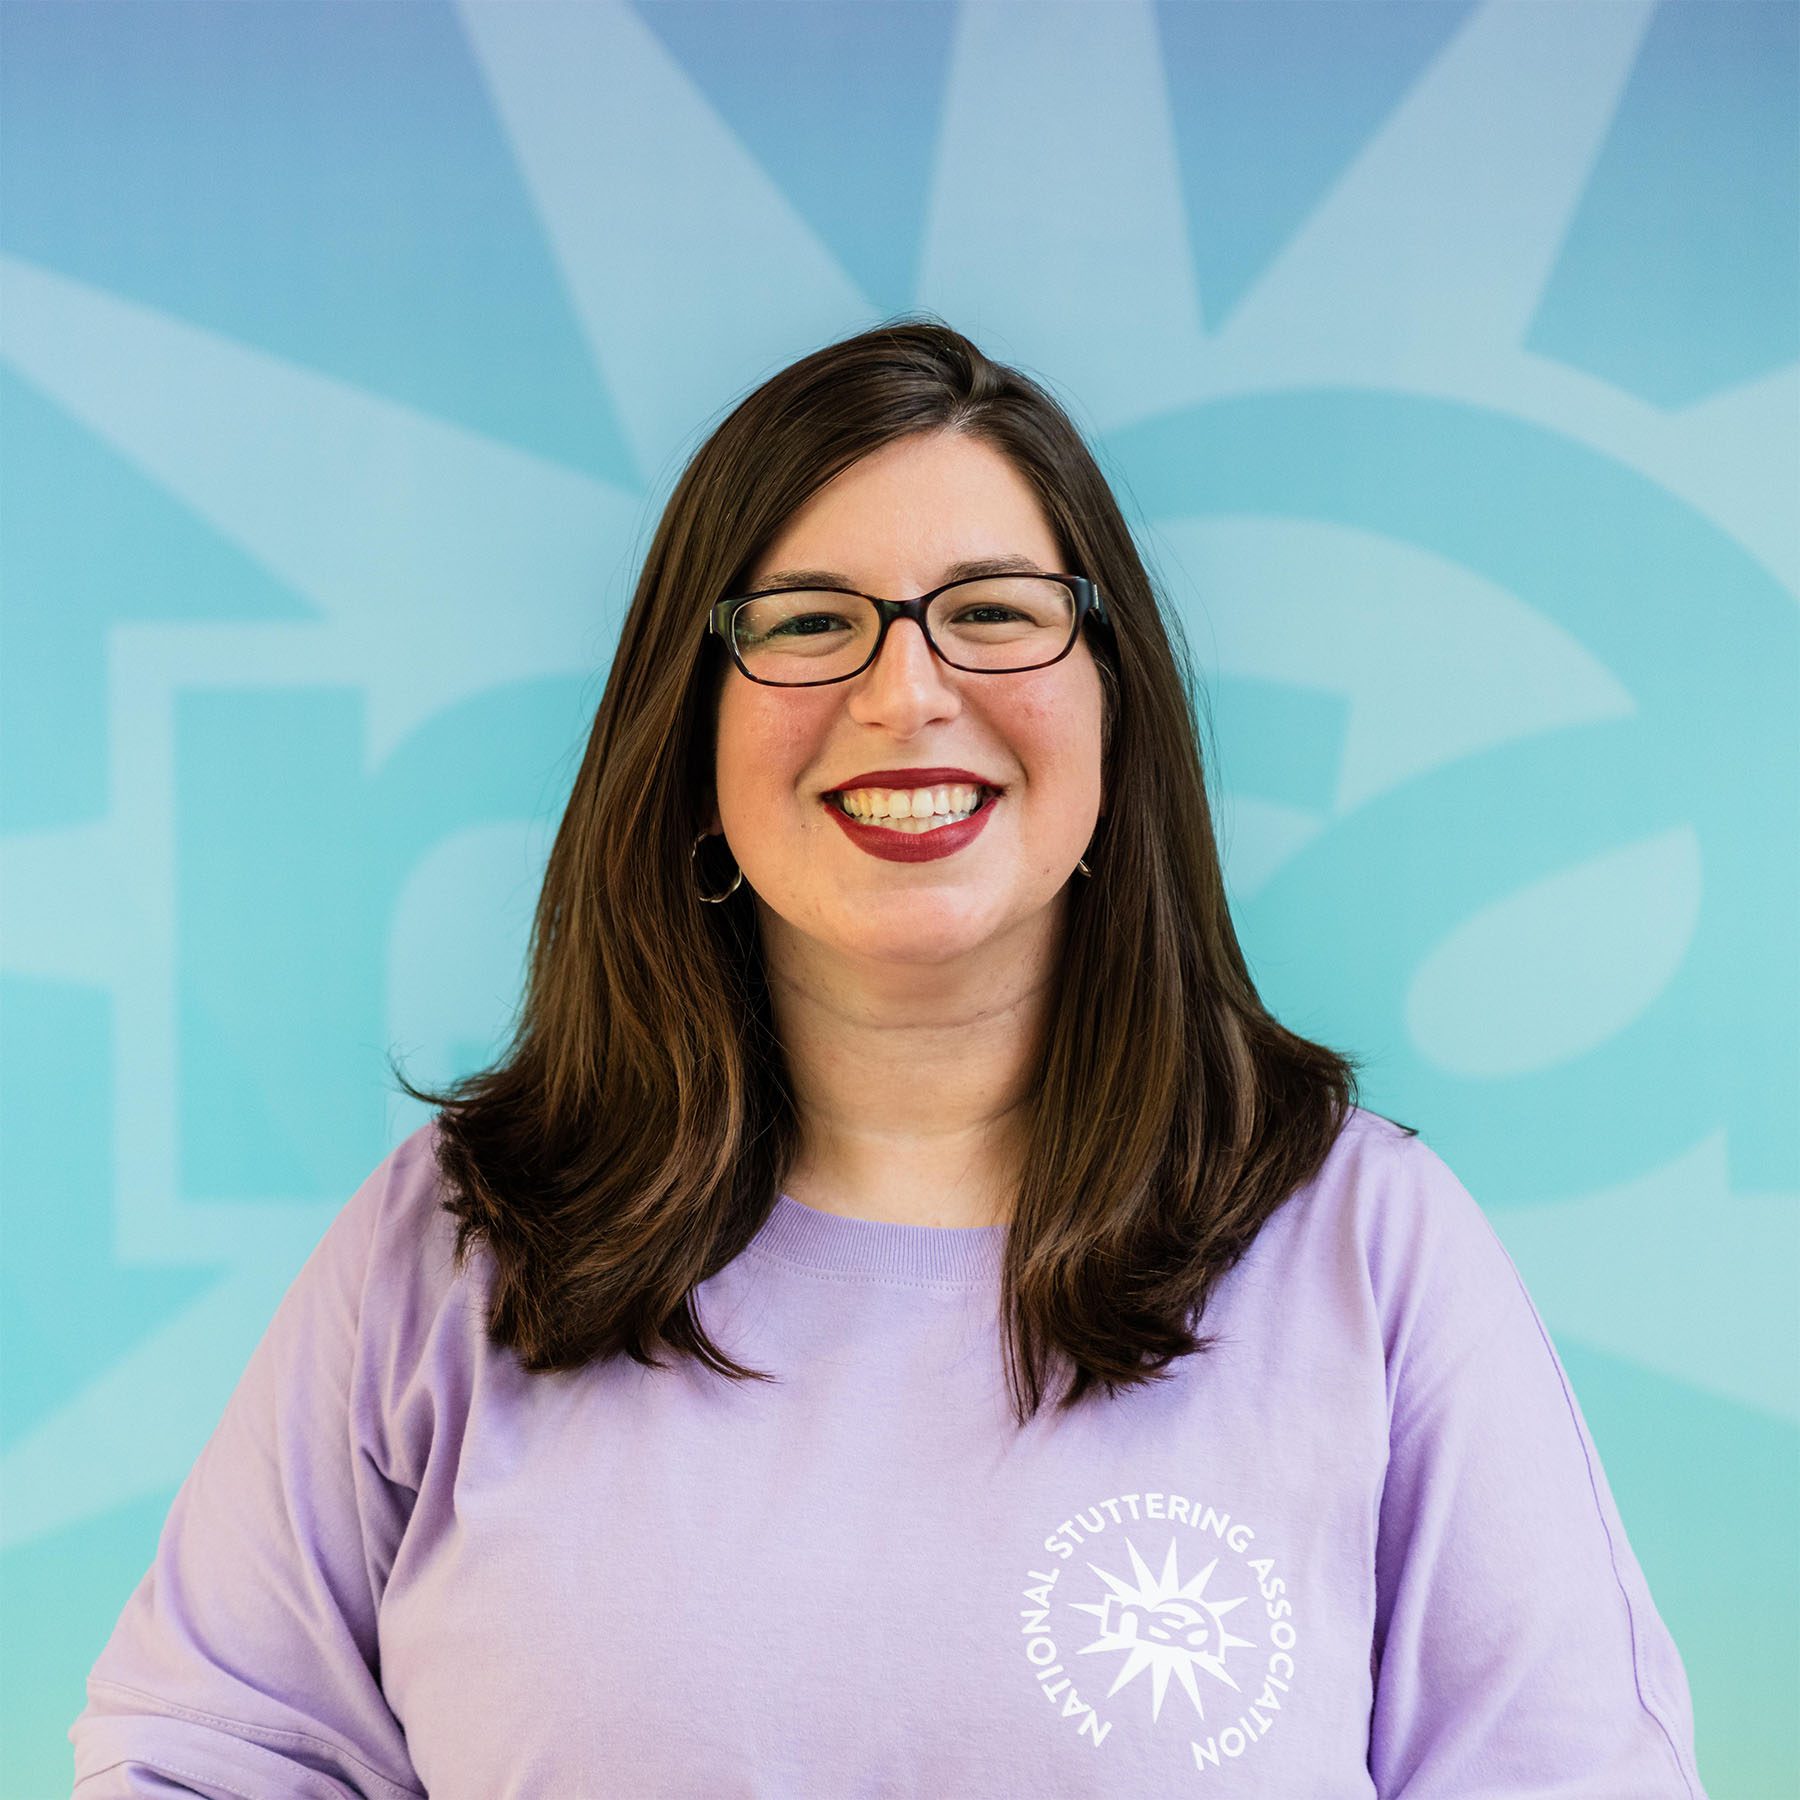 Sarah Onofri, a person with shoulder-length brown hair, is smiling at the camera. She is wearing glasses and a light purple shirt with a logo and text that reads "National Stuttering Association." The background features a teal and light blue design.